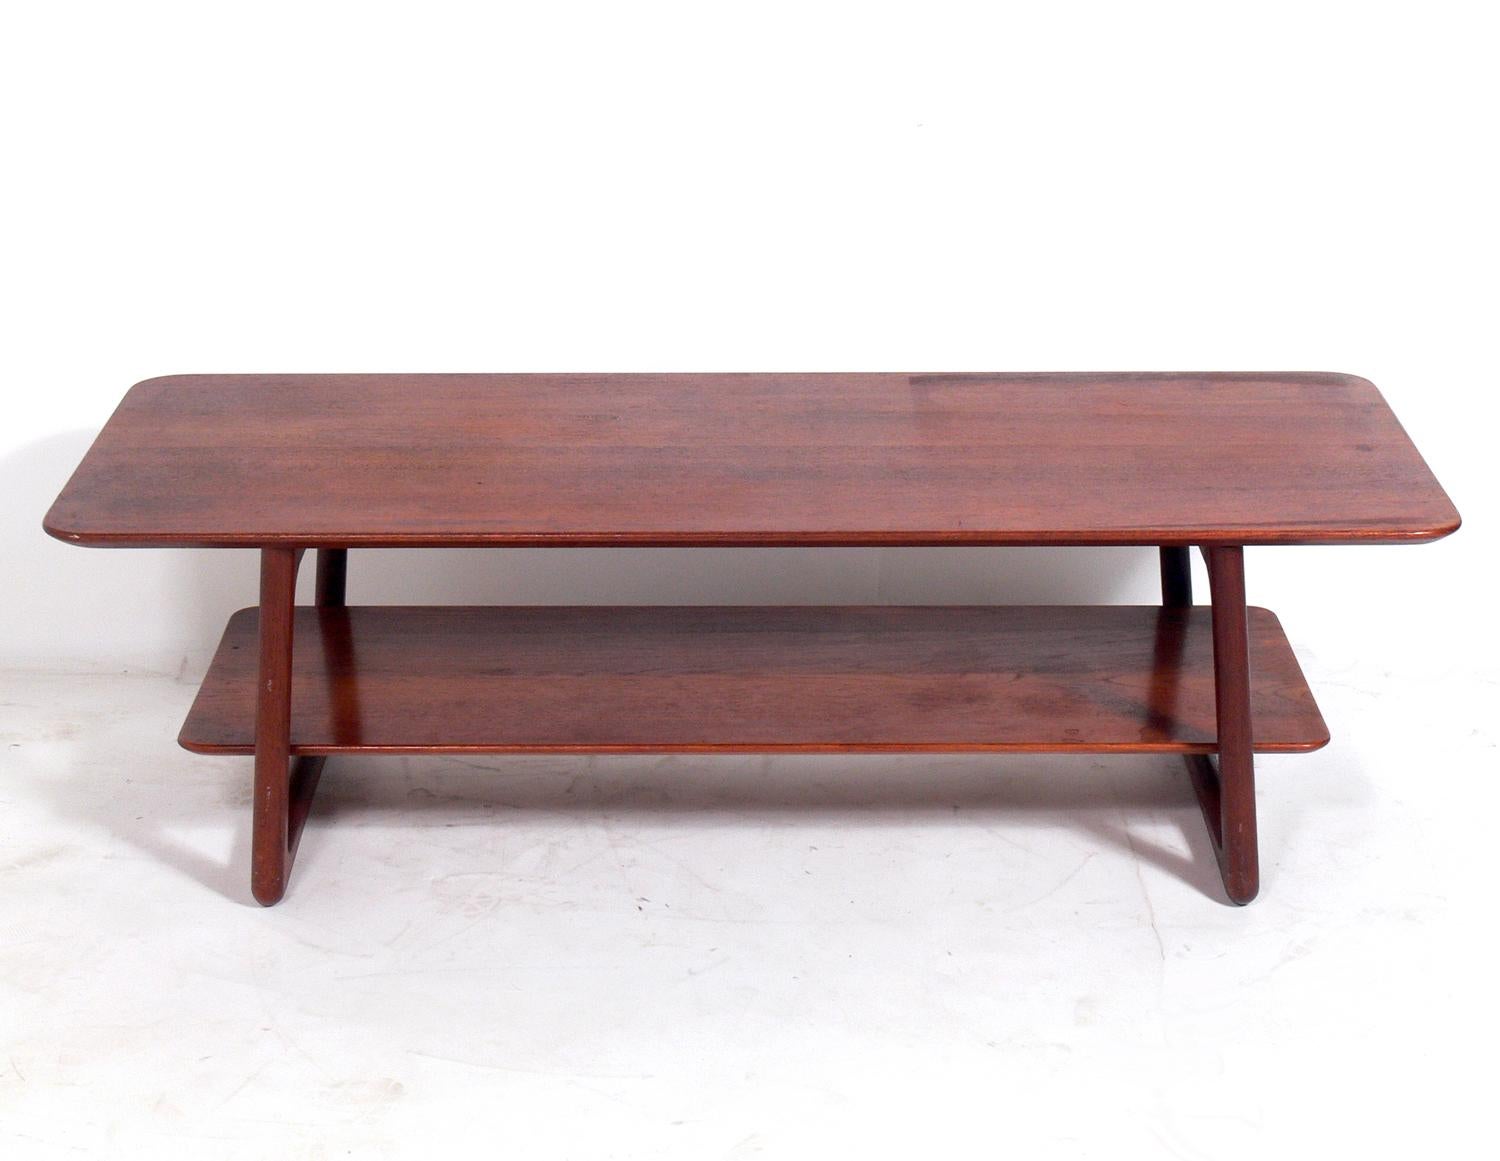 Danish modern teak coffee table, designed by Peter Hvidt & Orla Mølgaard Nielsen, Denmark, circa 1960s. This table is currently being refinished and will look wonderful when completed. The price noted includes refinishing.